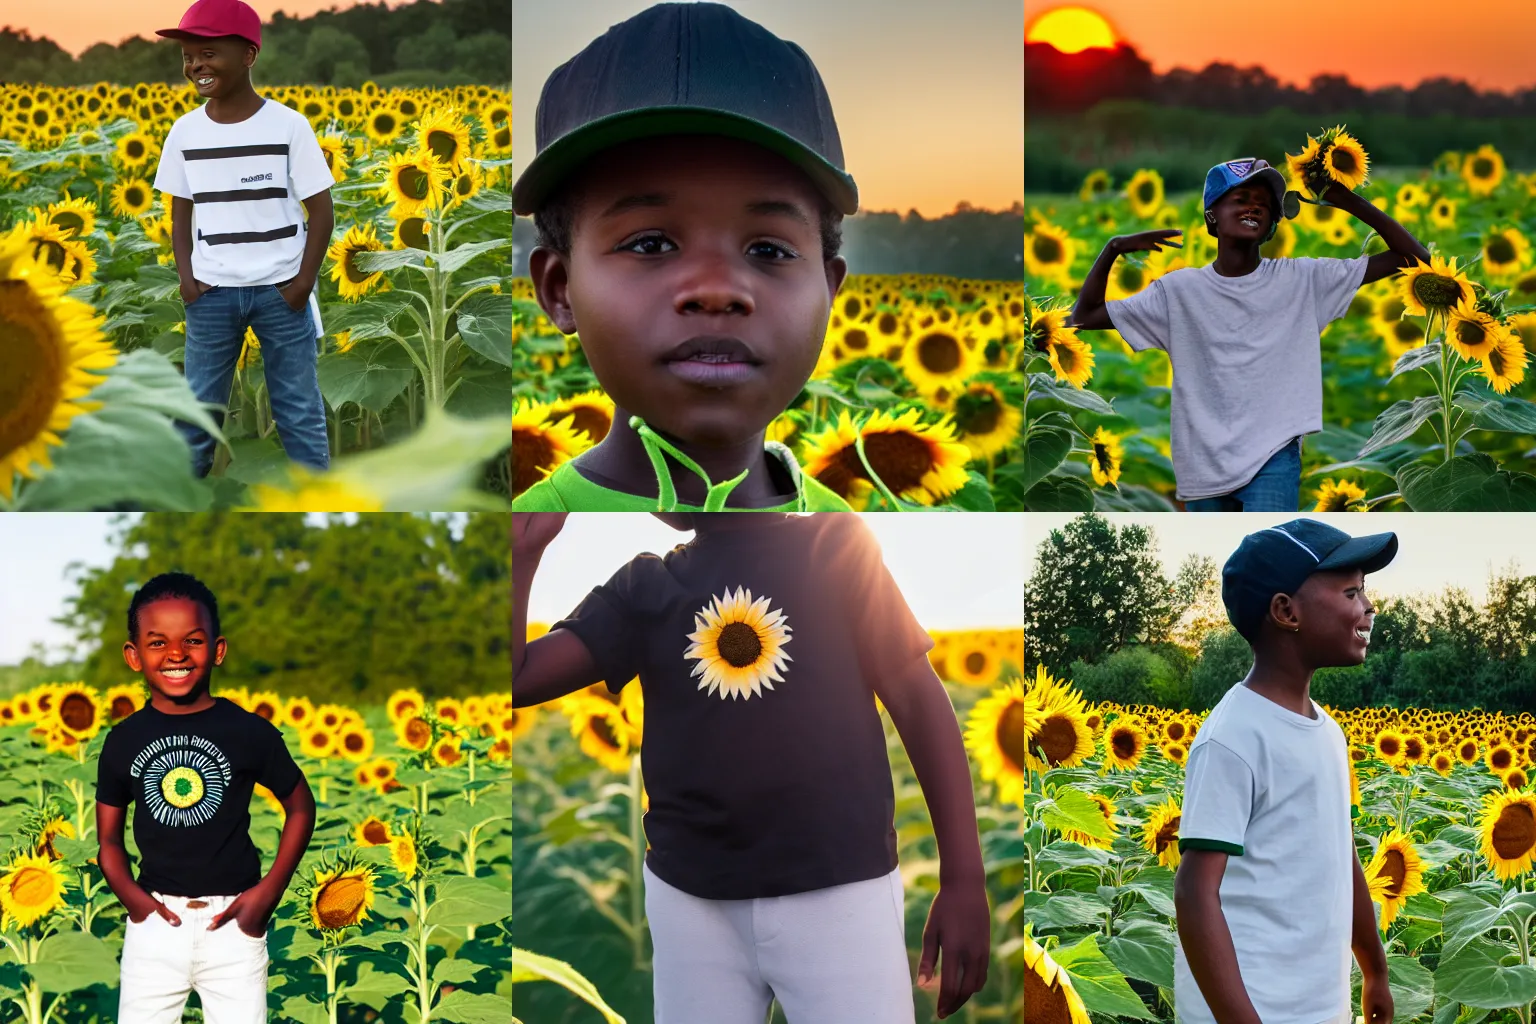 Prompt: A black boy with white t-shirt and green jeans and a green cap standing in a sunflower field with bees flying around him while sun is setting in the background, professional photography